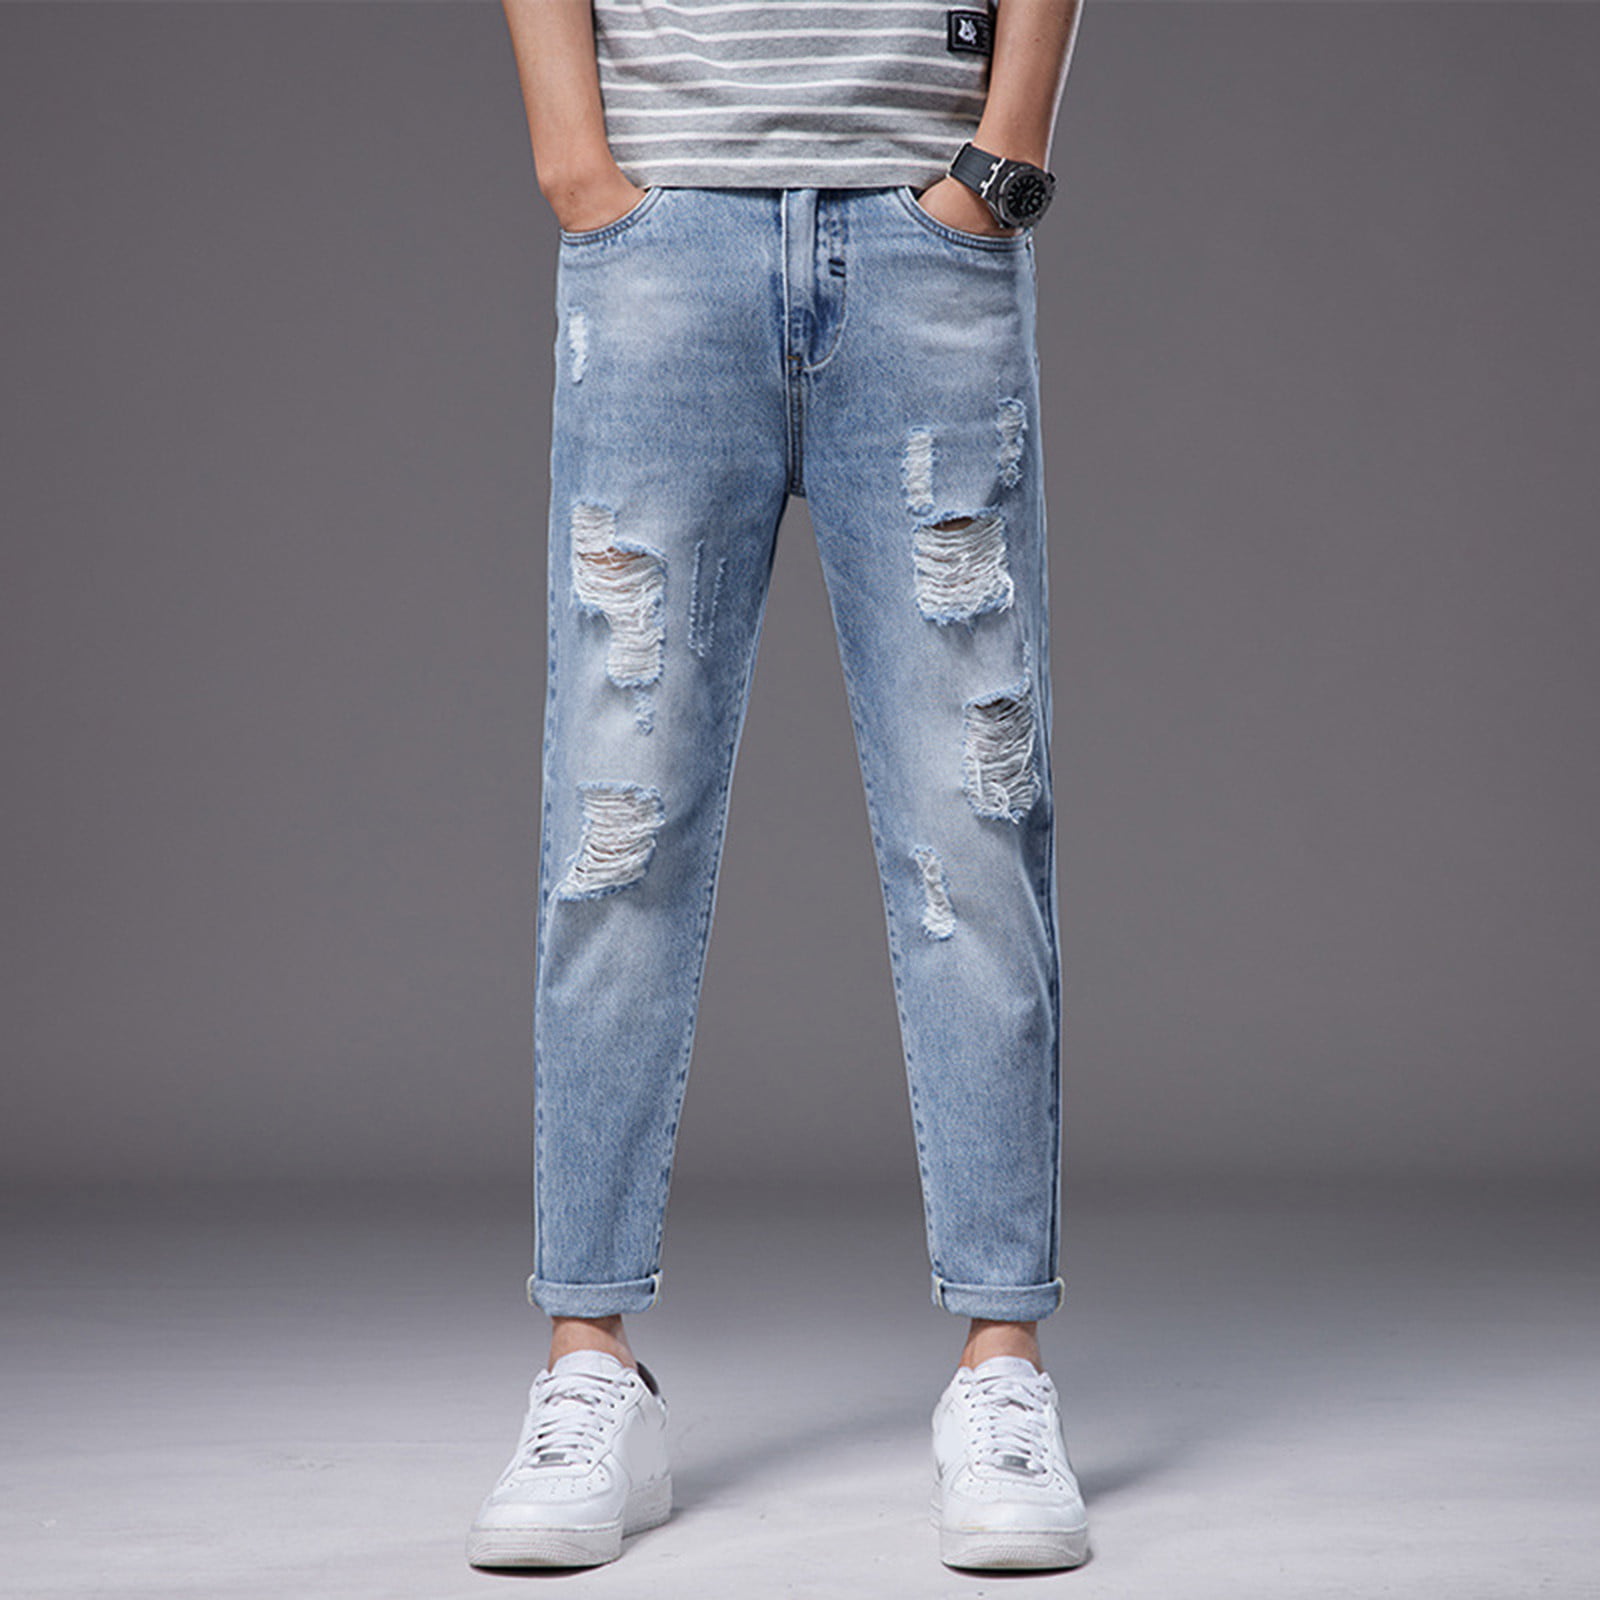 5 Best Ripped Jeans For Men & How To Wear Them with Style | White ripped  jeans, Ripped jeans men, White jeans men